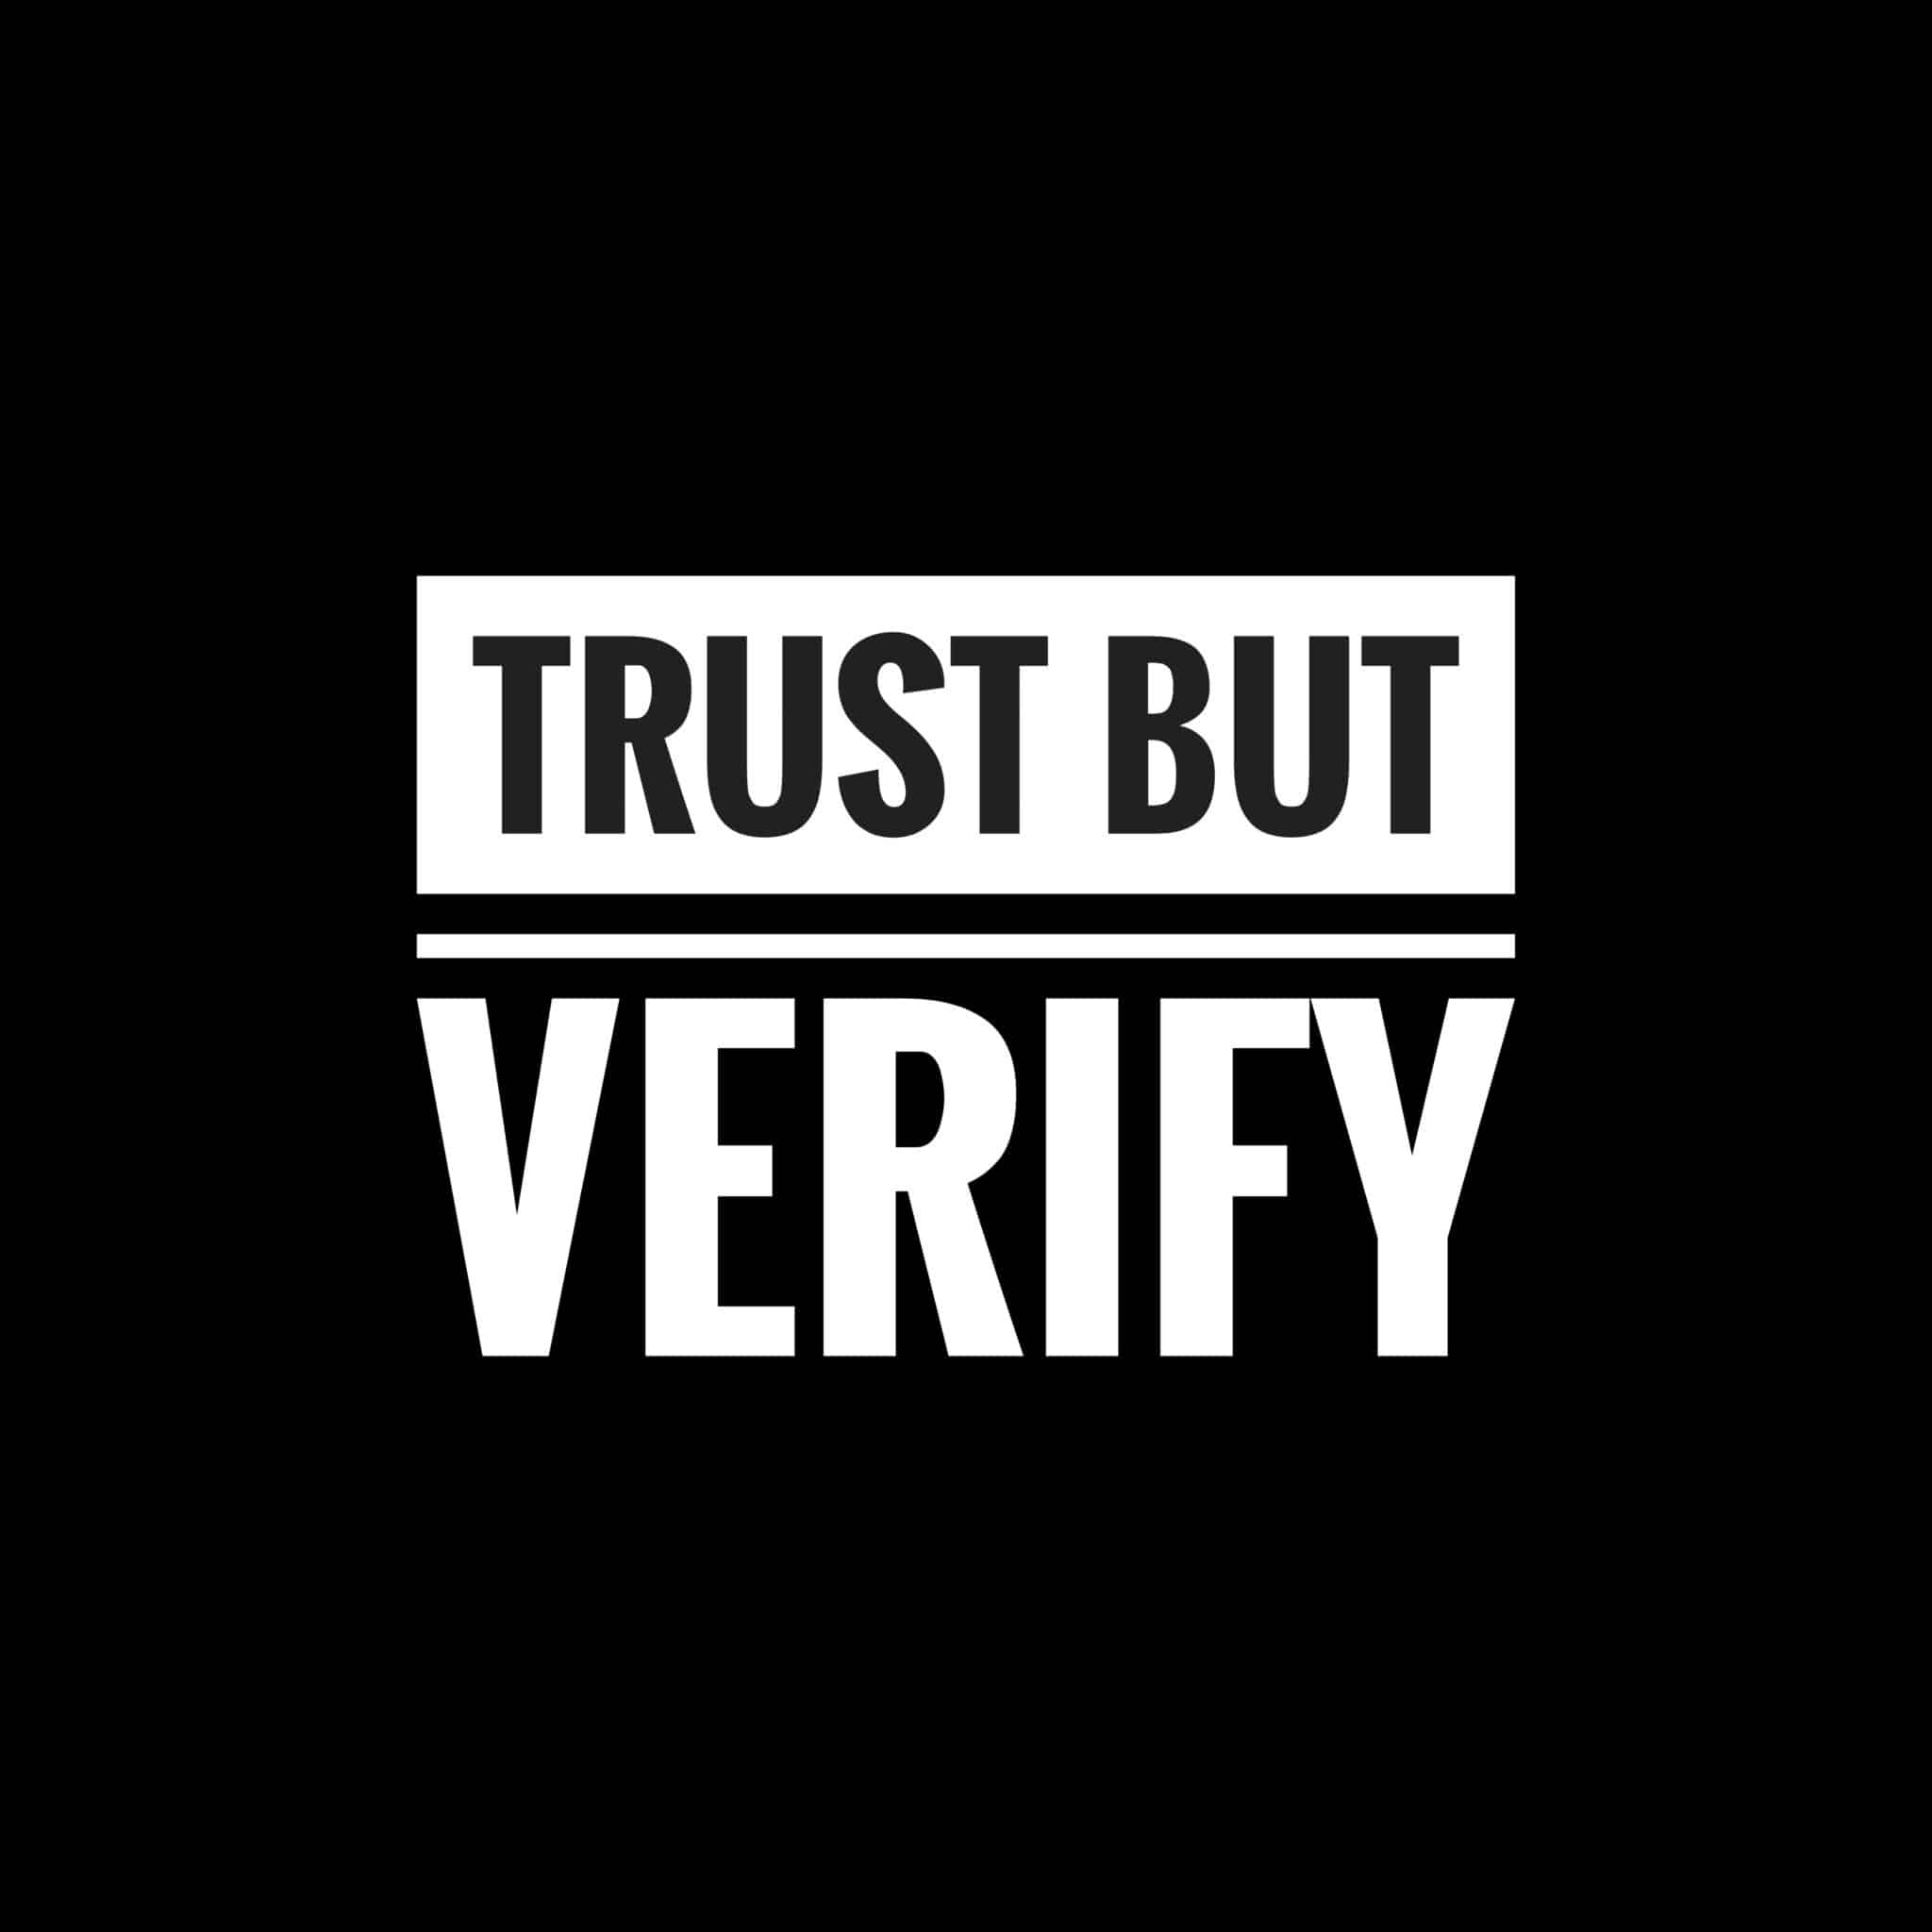 Trust But Verify motto, for Athreon's secure transcription services, appears on black background.